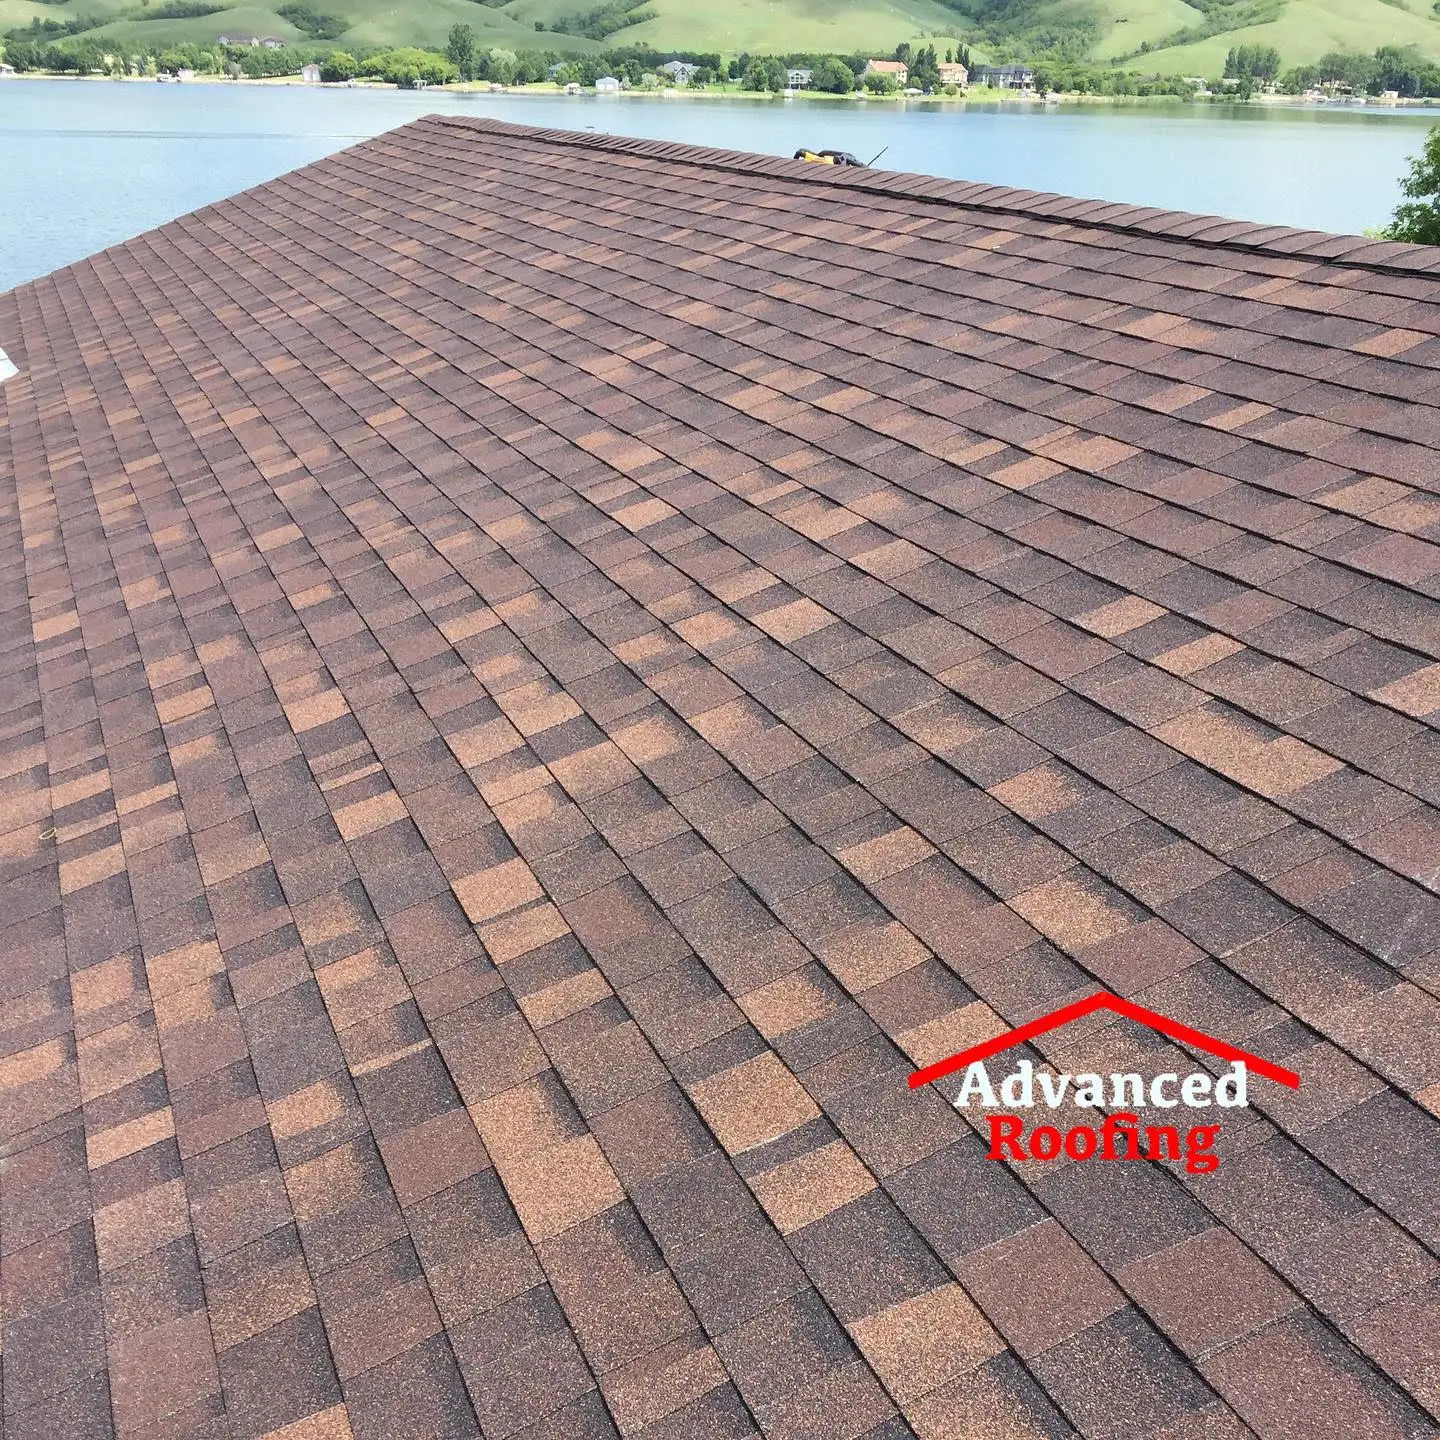 Before and After of a New Roof From an Insurance Claim